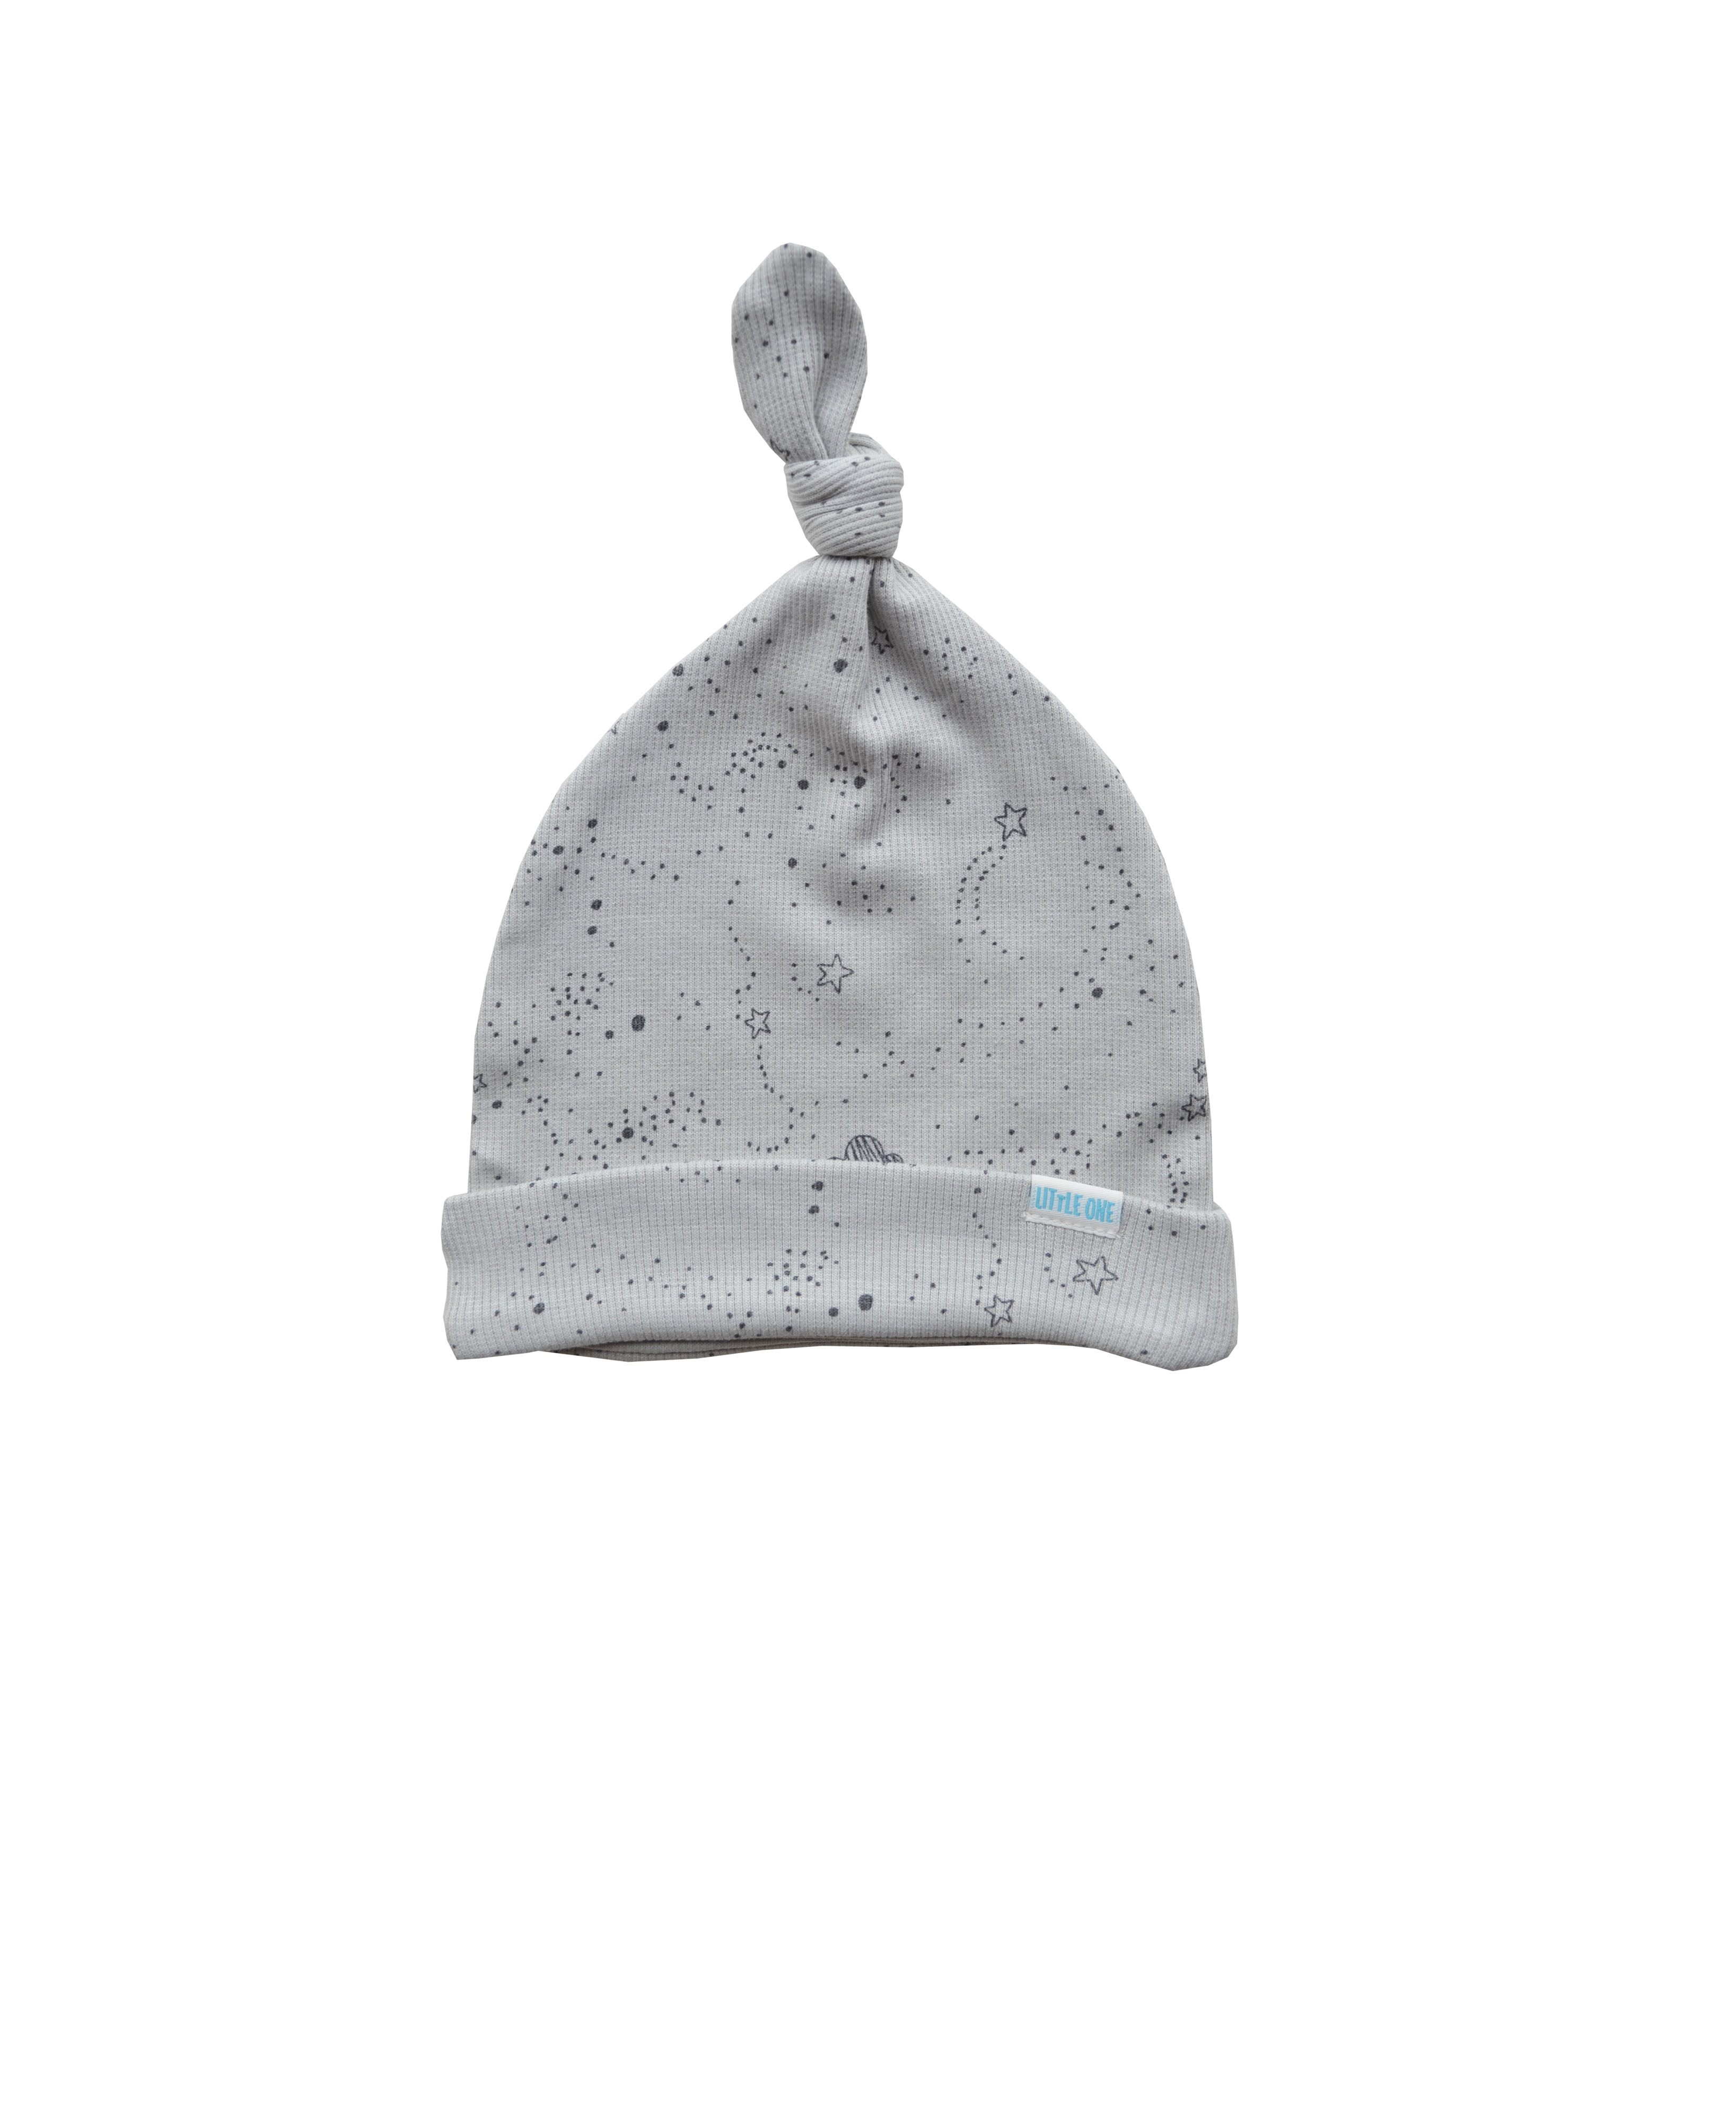 Babeez | Allover Stars and Cloud print on Grey Beanie Cap (100% Cotton Rib) undefined